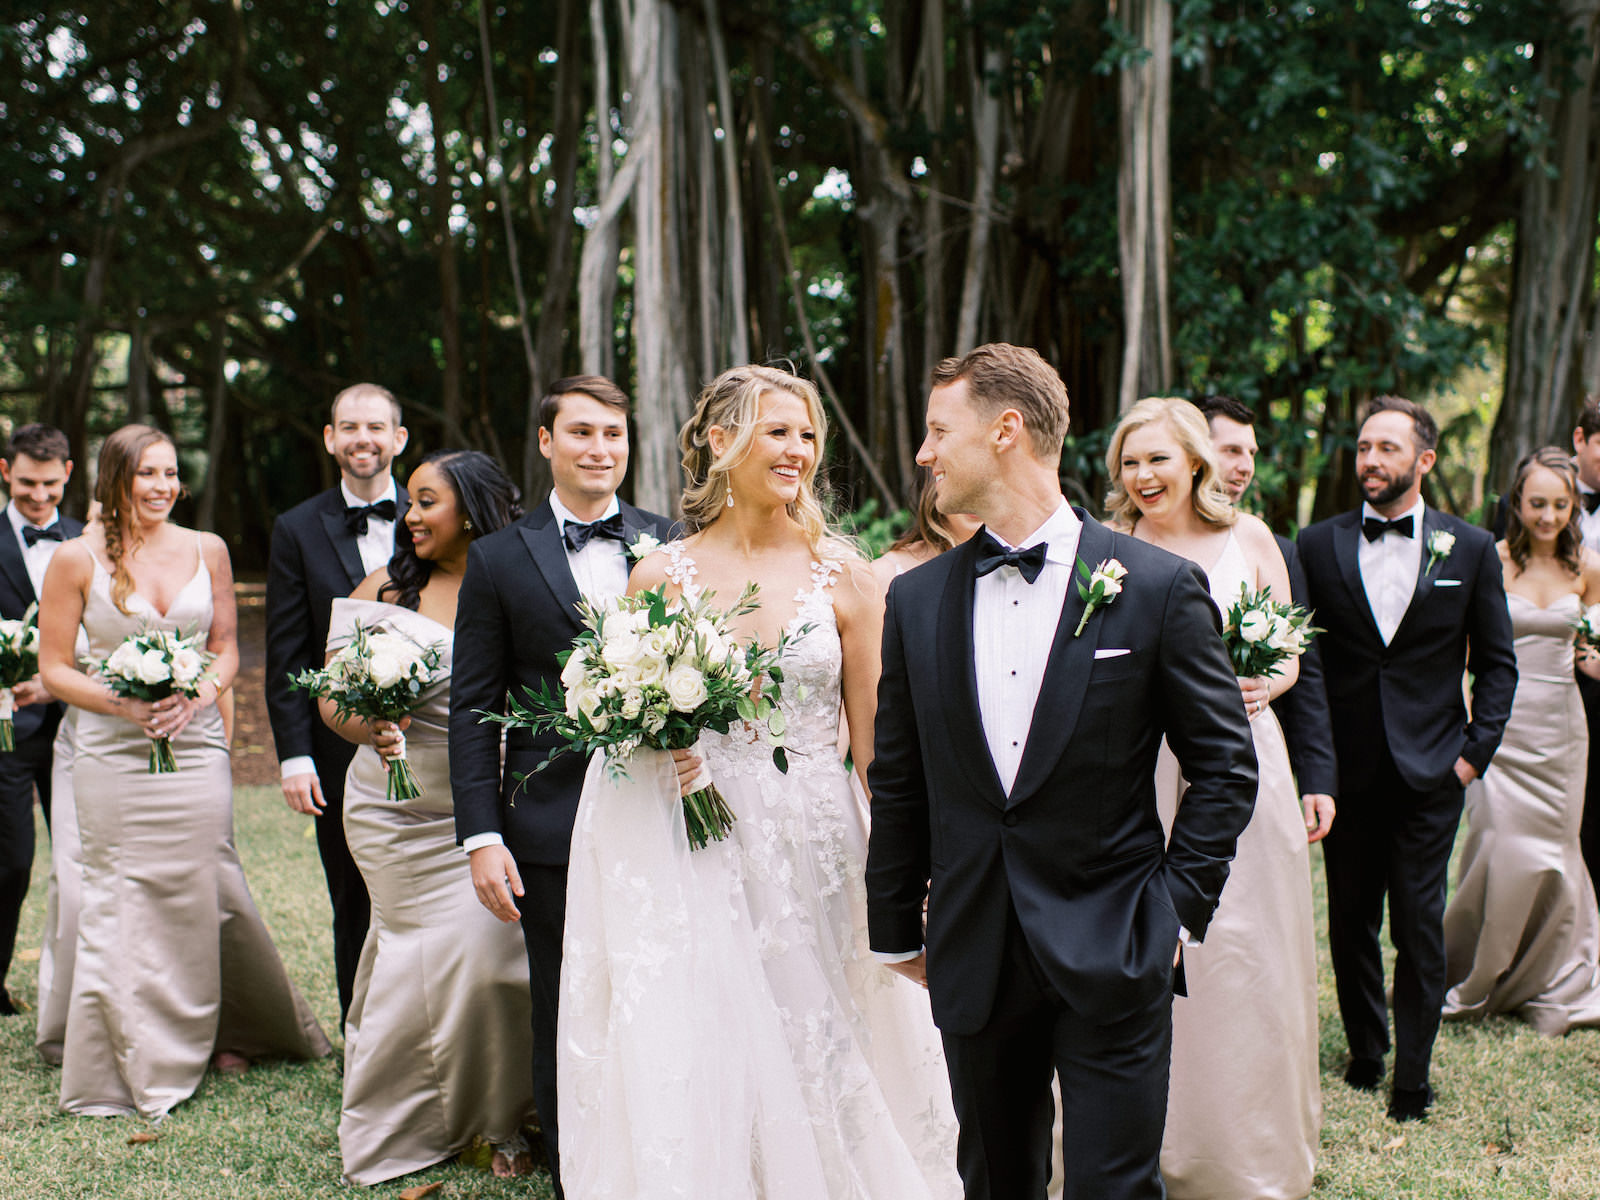 Modern Day Fairytale Florida Wedding Party, Bride Wearing Galia Lahav Wedding Dress Holding White Floral and Ivory Rose Bouquet with Greenery, Bridesmaids in Blush Satin Hayley Paige Occasions Long Mix and Match Dresses, Groomsmen in Classic Black Bowtie Tuxedo | Tampa Dress Shop Isabel O’Neil Bridal | Sarasota Hair and Makeup by Femme Akoi Beauty Studios | Sarasota Wedding Planner NK Weddings | Tampa Bay Bridesmaids Dress Shop Bella Bridesmaids Tampa